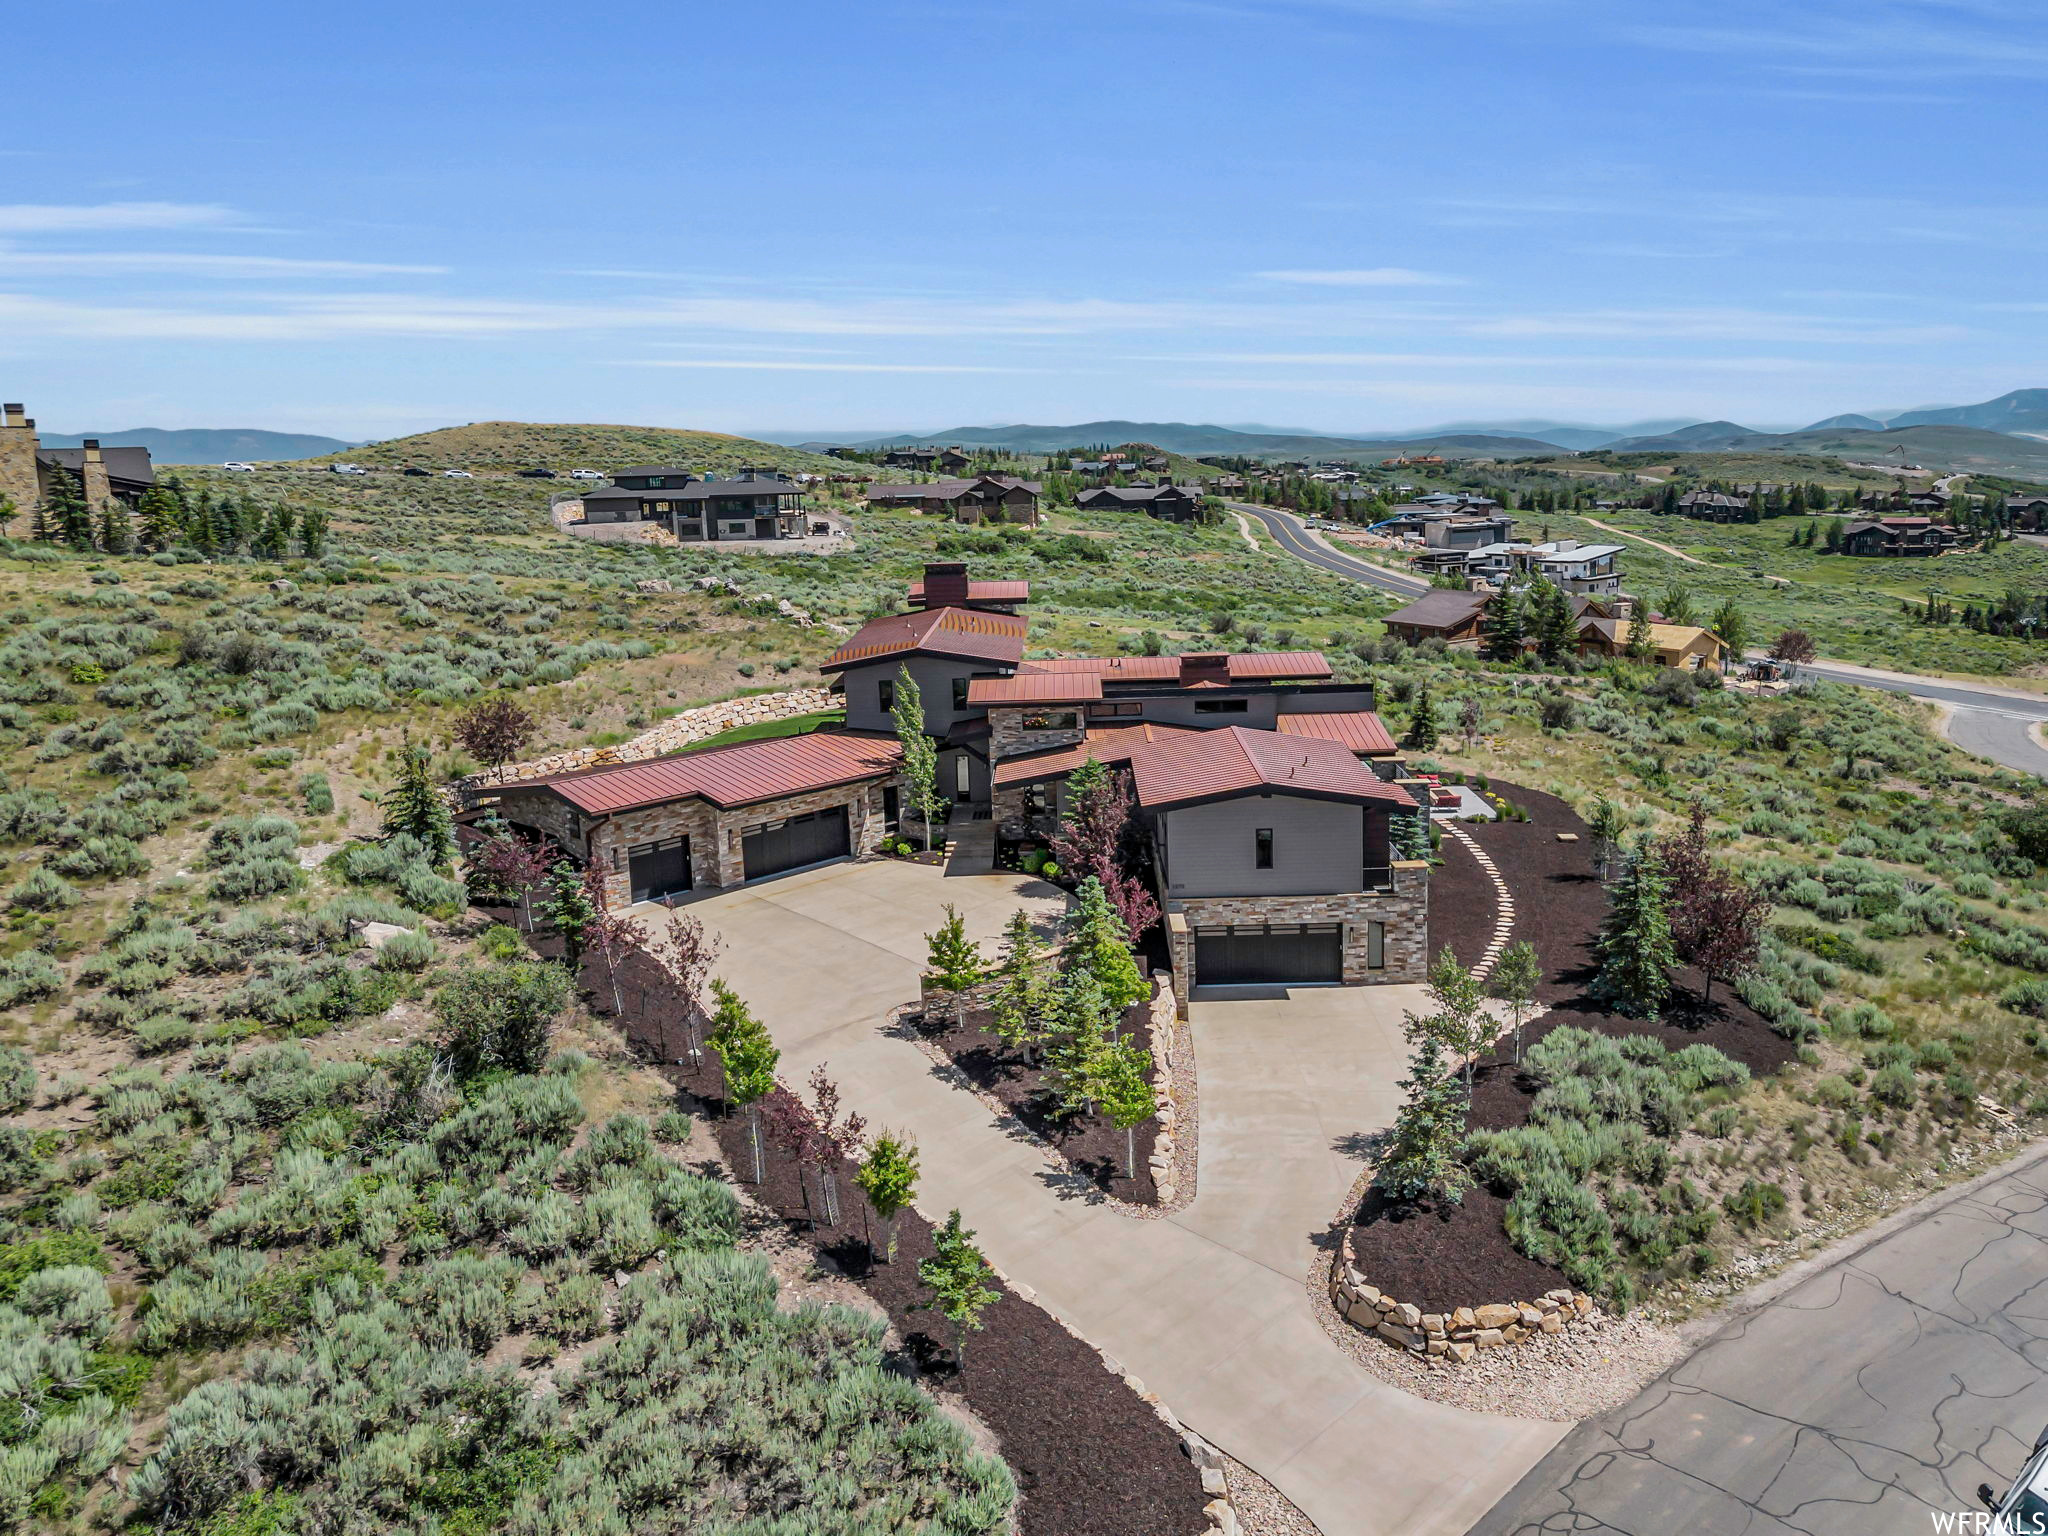 3270 CENTRAL PACIFIC, Park City, Utah 84098, 6 Bedrooms Bedrooms, 26 Rooms Rooms,2 BathroomsBathrooms,Residential,For sale,CENTRAL PACIFIC,1892635